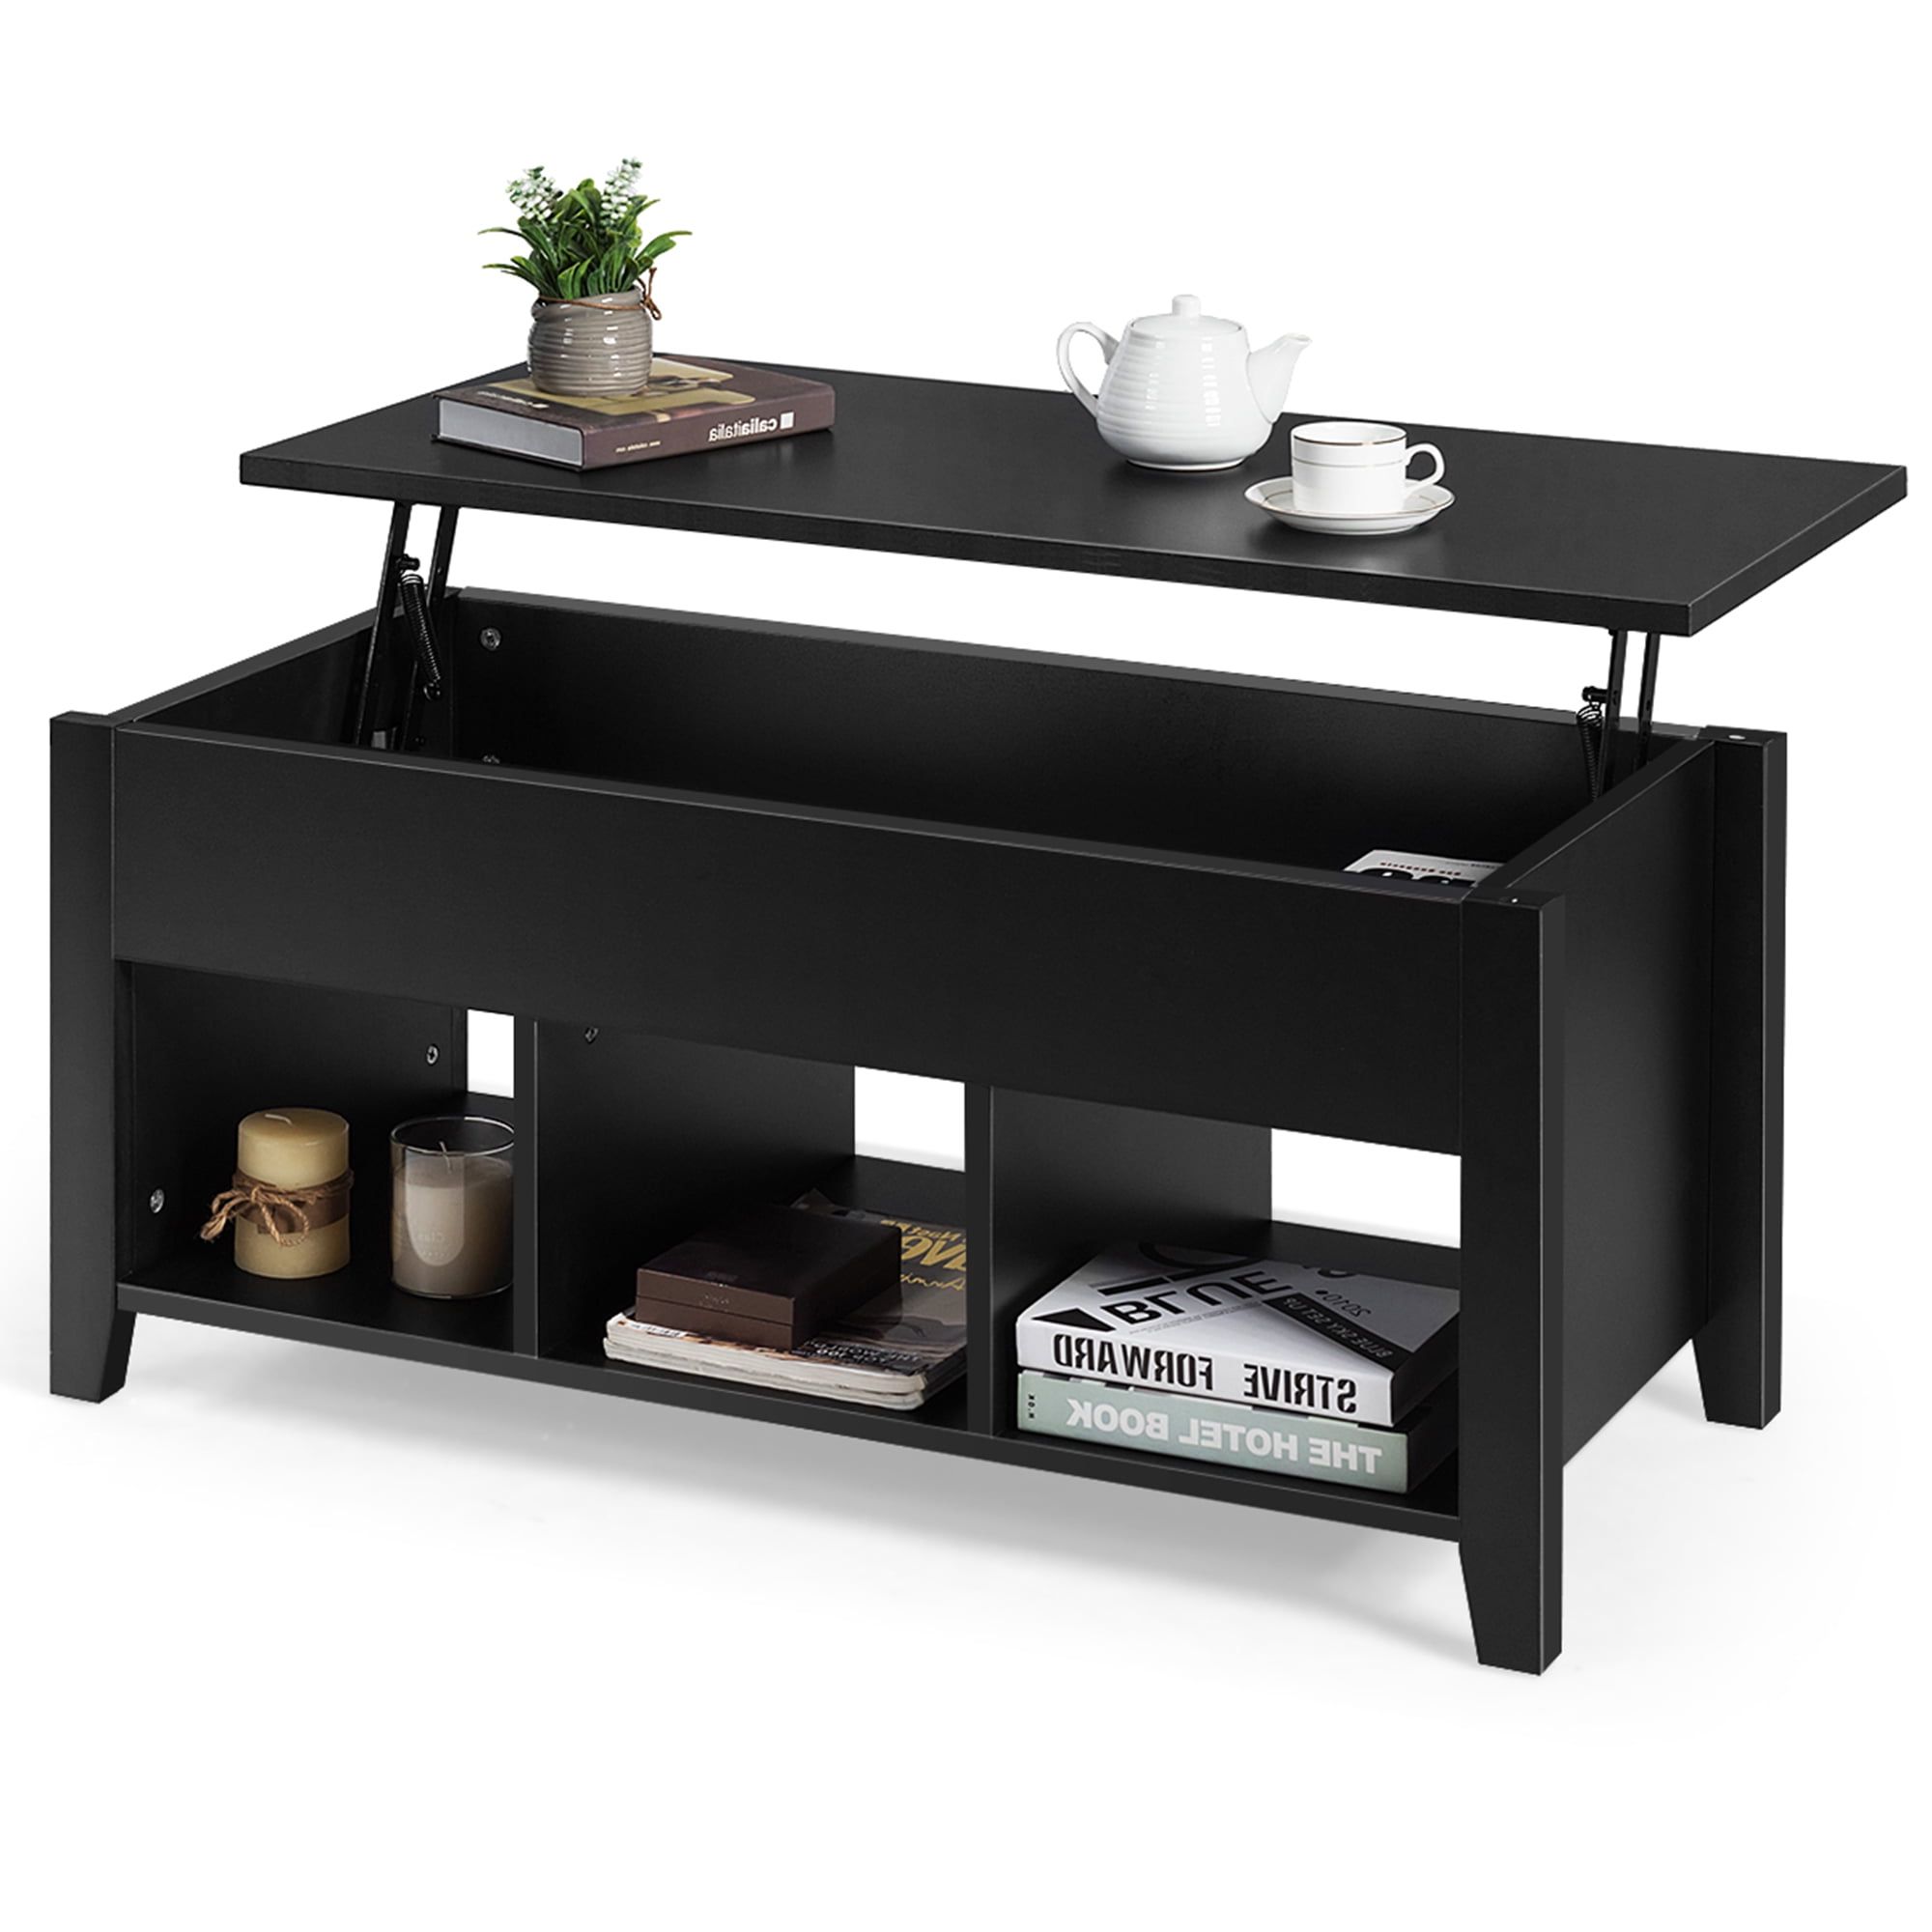 Most Recently Released Lift Top Coffee Tables With Storage With Gymax Lift Top Coffee Table W/ Storage Compartment Shelf Living Room (Photo 6 of 15)